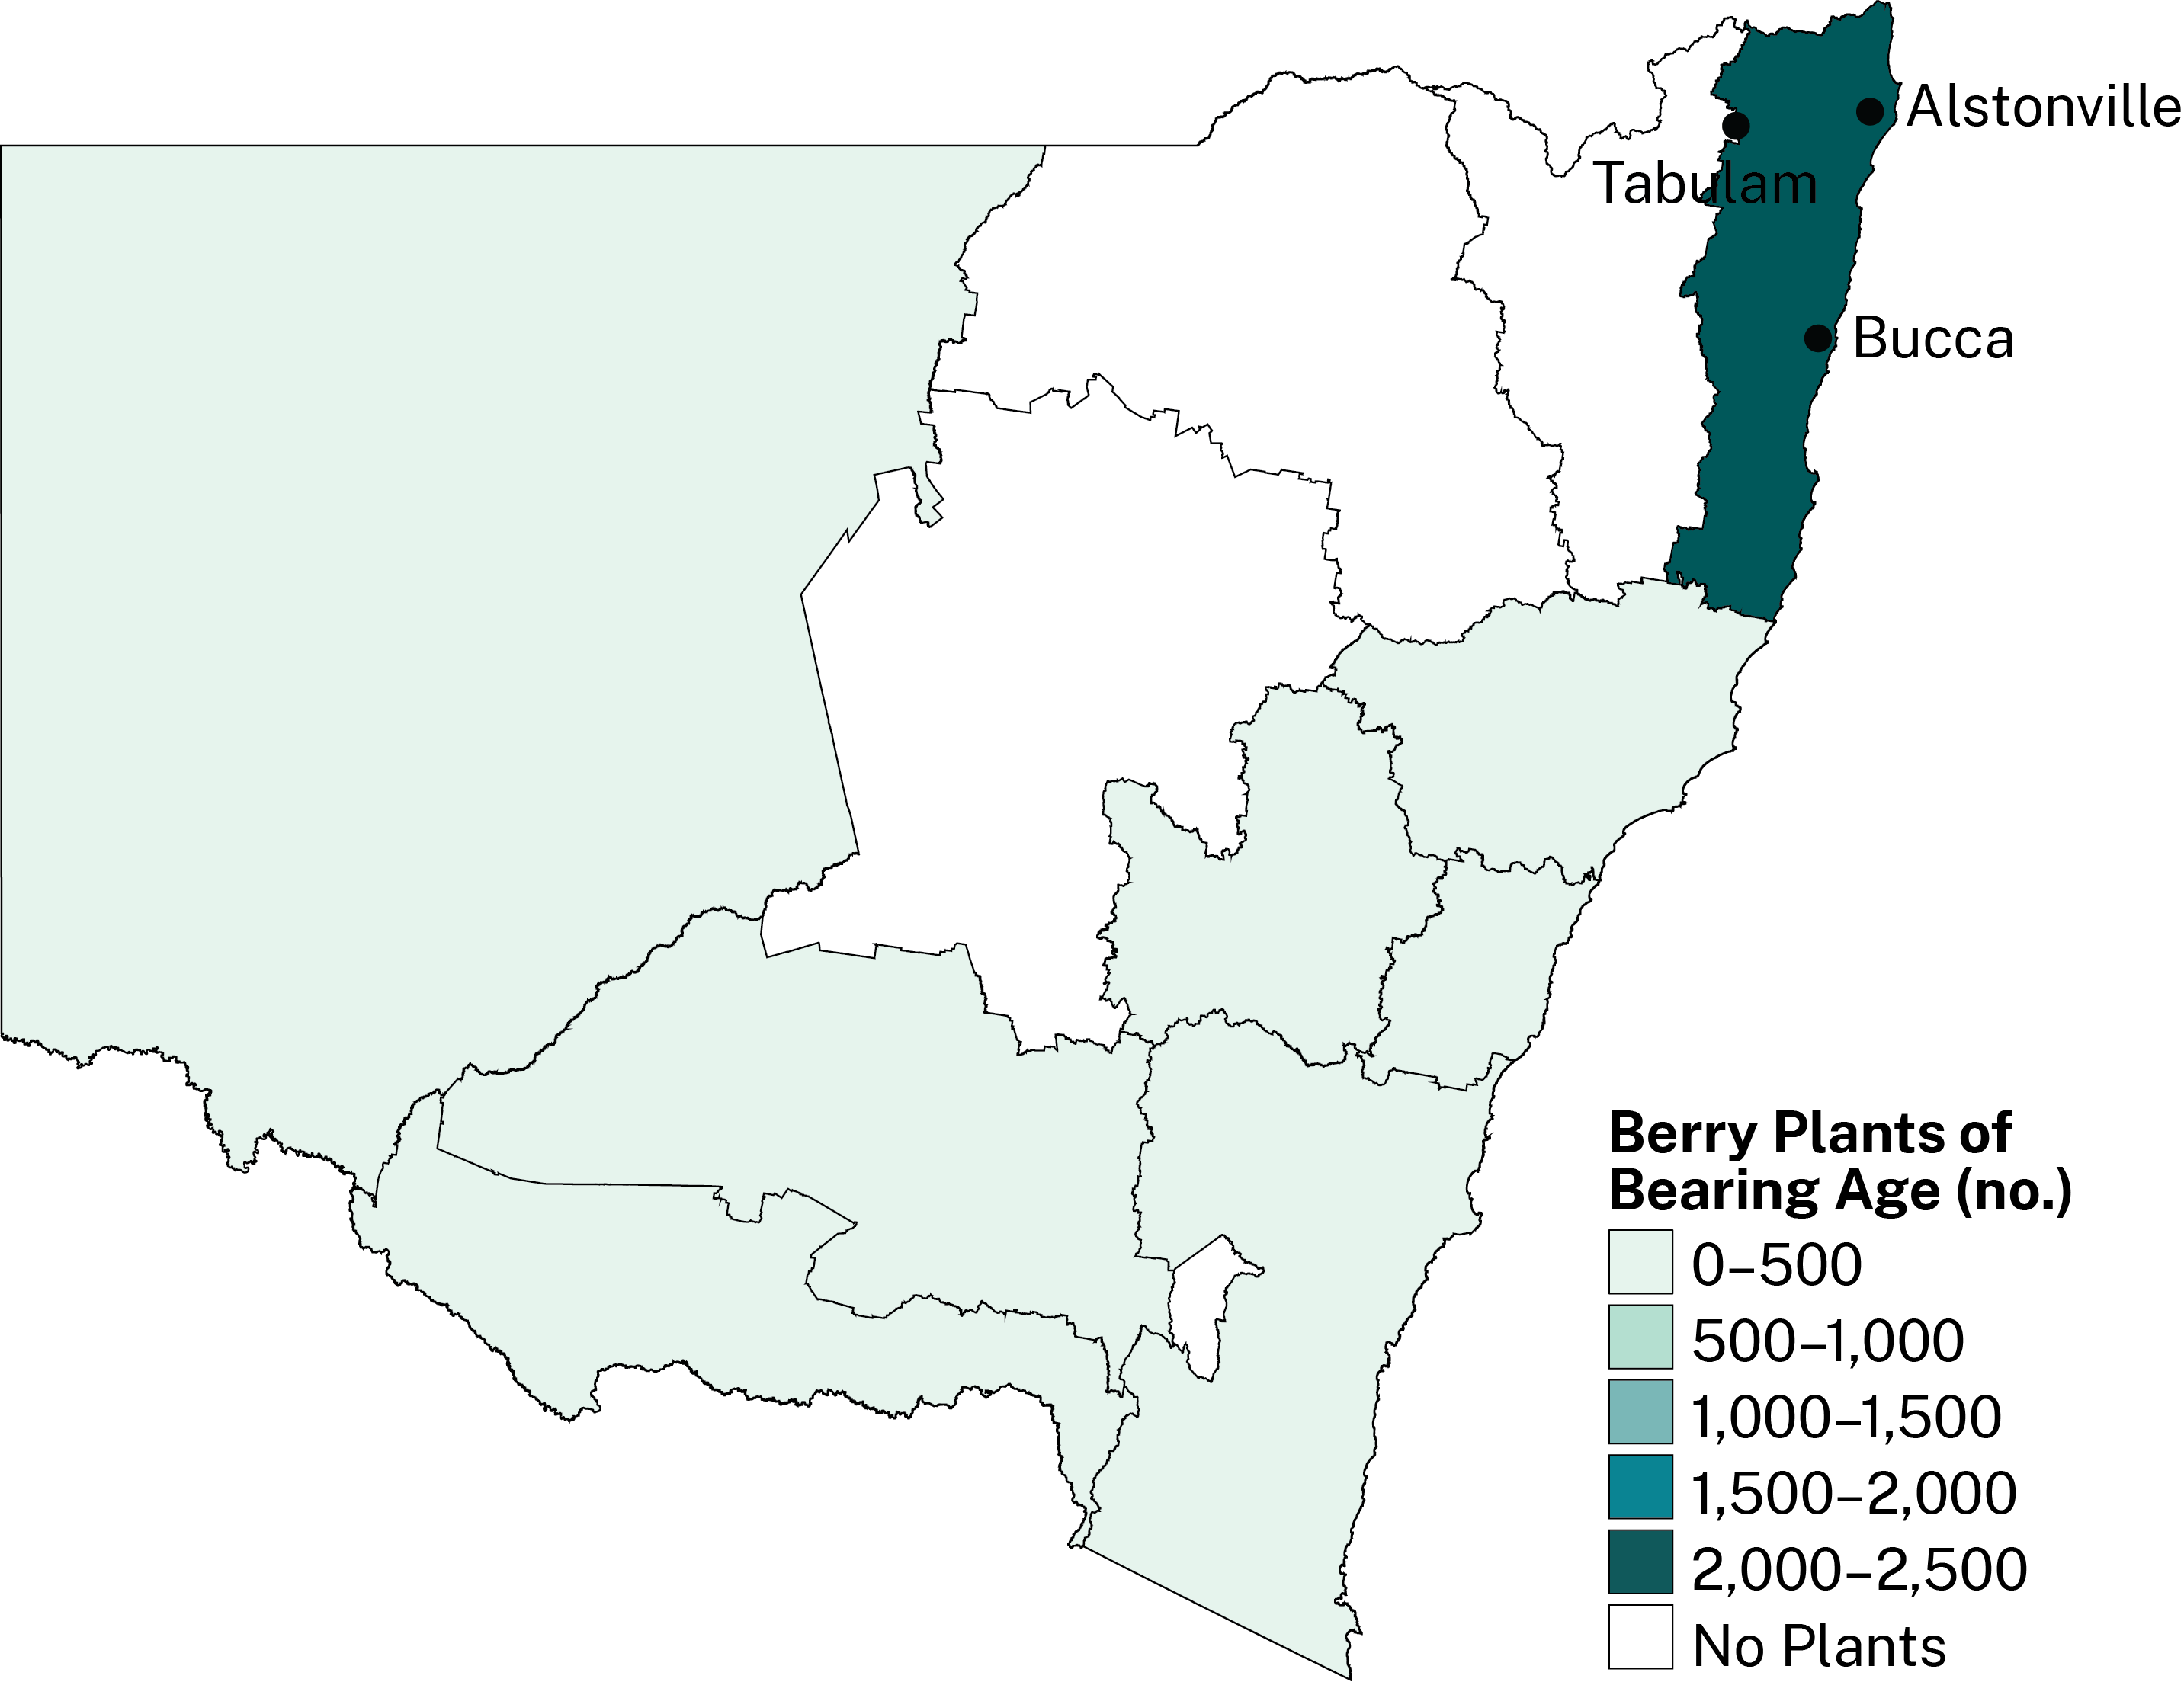 Blueberry production in NSW is focused on the north coast, with other growing regions spread across most of the state.